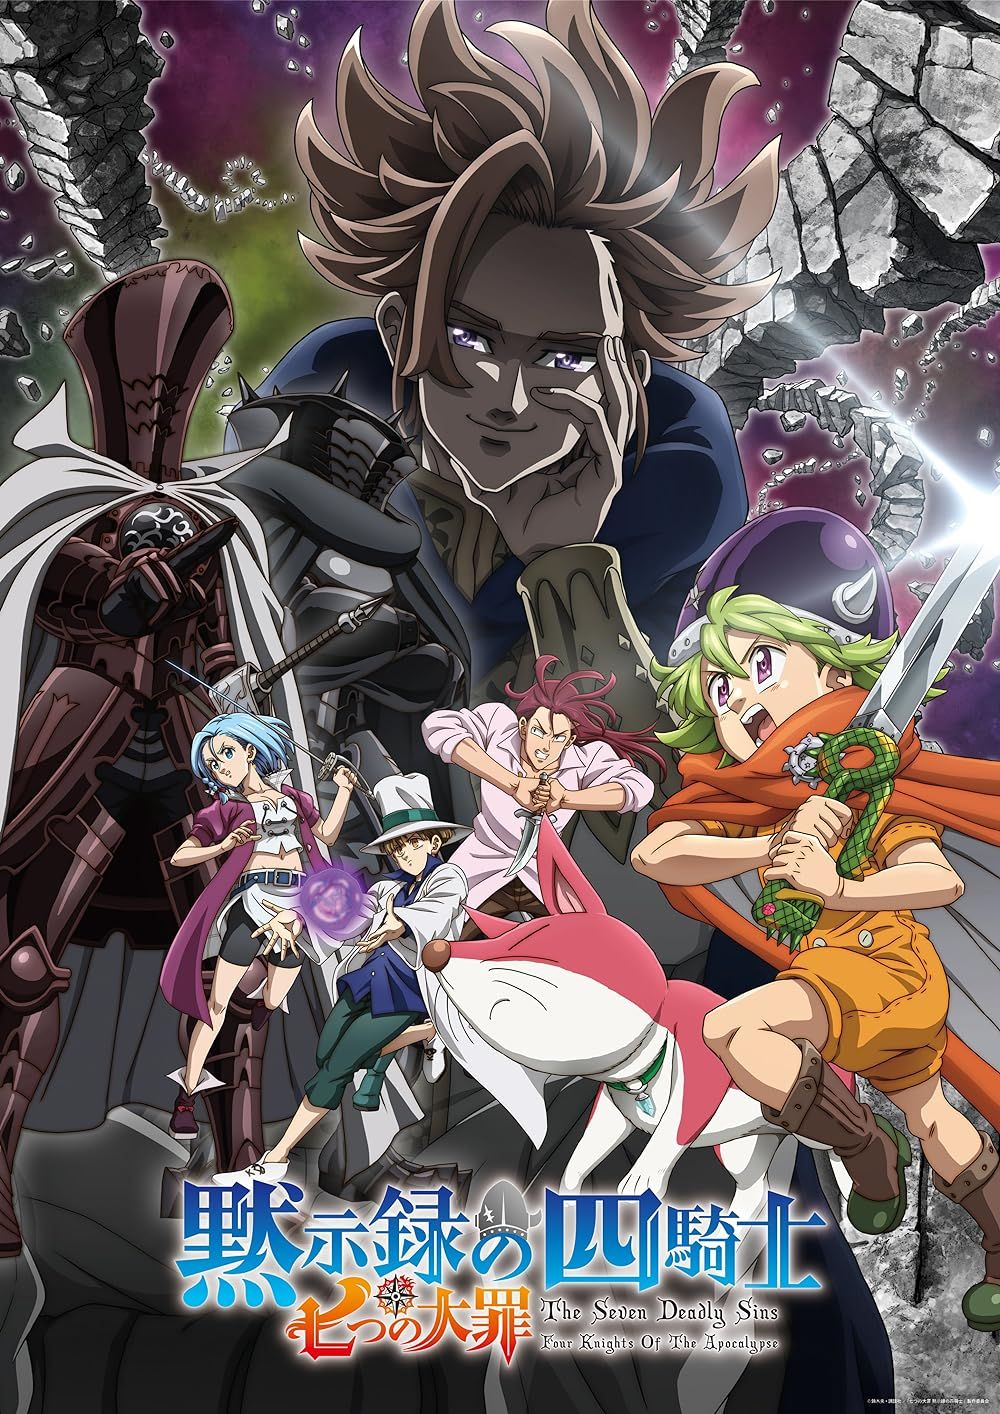 The cast of Seven Deadly Sins Four Knight of the Apocalypse on the promo poster